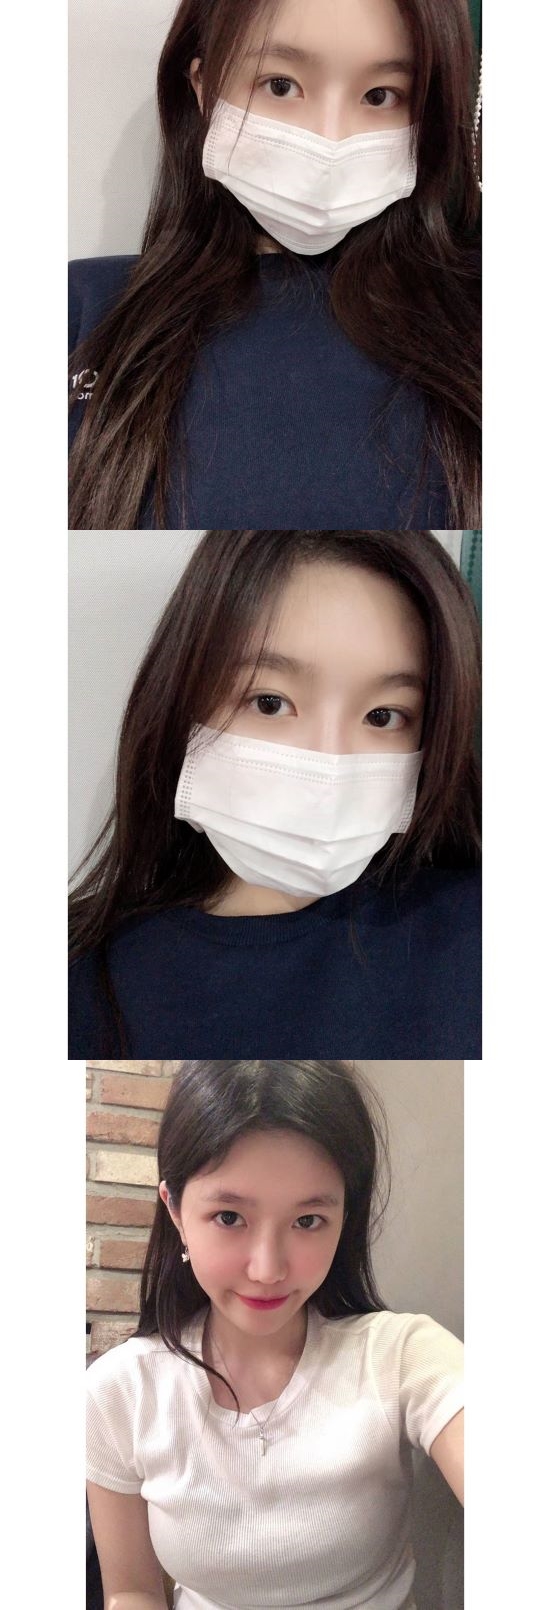 Group WJSN member Polysomnography reported on the latest situation.On the 28th, Polysomnography said through the official WJSN Instagram, Mask always do not hurt Ukudo Happy birthday.I love you # Space Stargram # WJSN #Polysomnography and posted a picture.In the public photos, there is a picture of Mask and a smile of Polysomnography.Polysomnographys flawless skin, distinctive features, and overflowing innocence attract attention.Polysomnography temporarily suspended its activities on December 12 last year due to anxiety disorder.Photo: WJSN Official Instagram